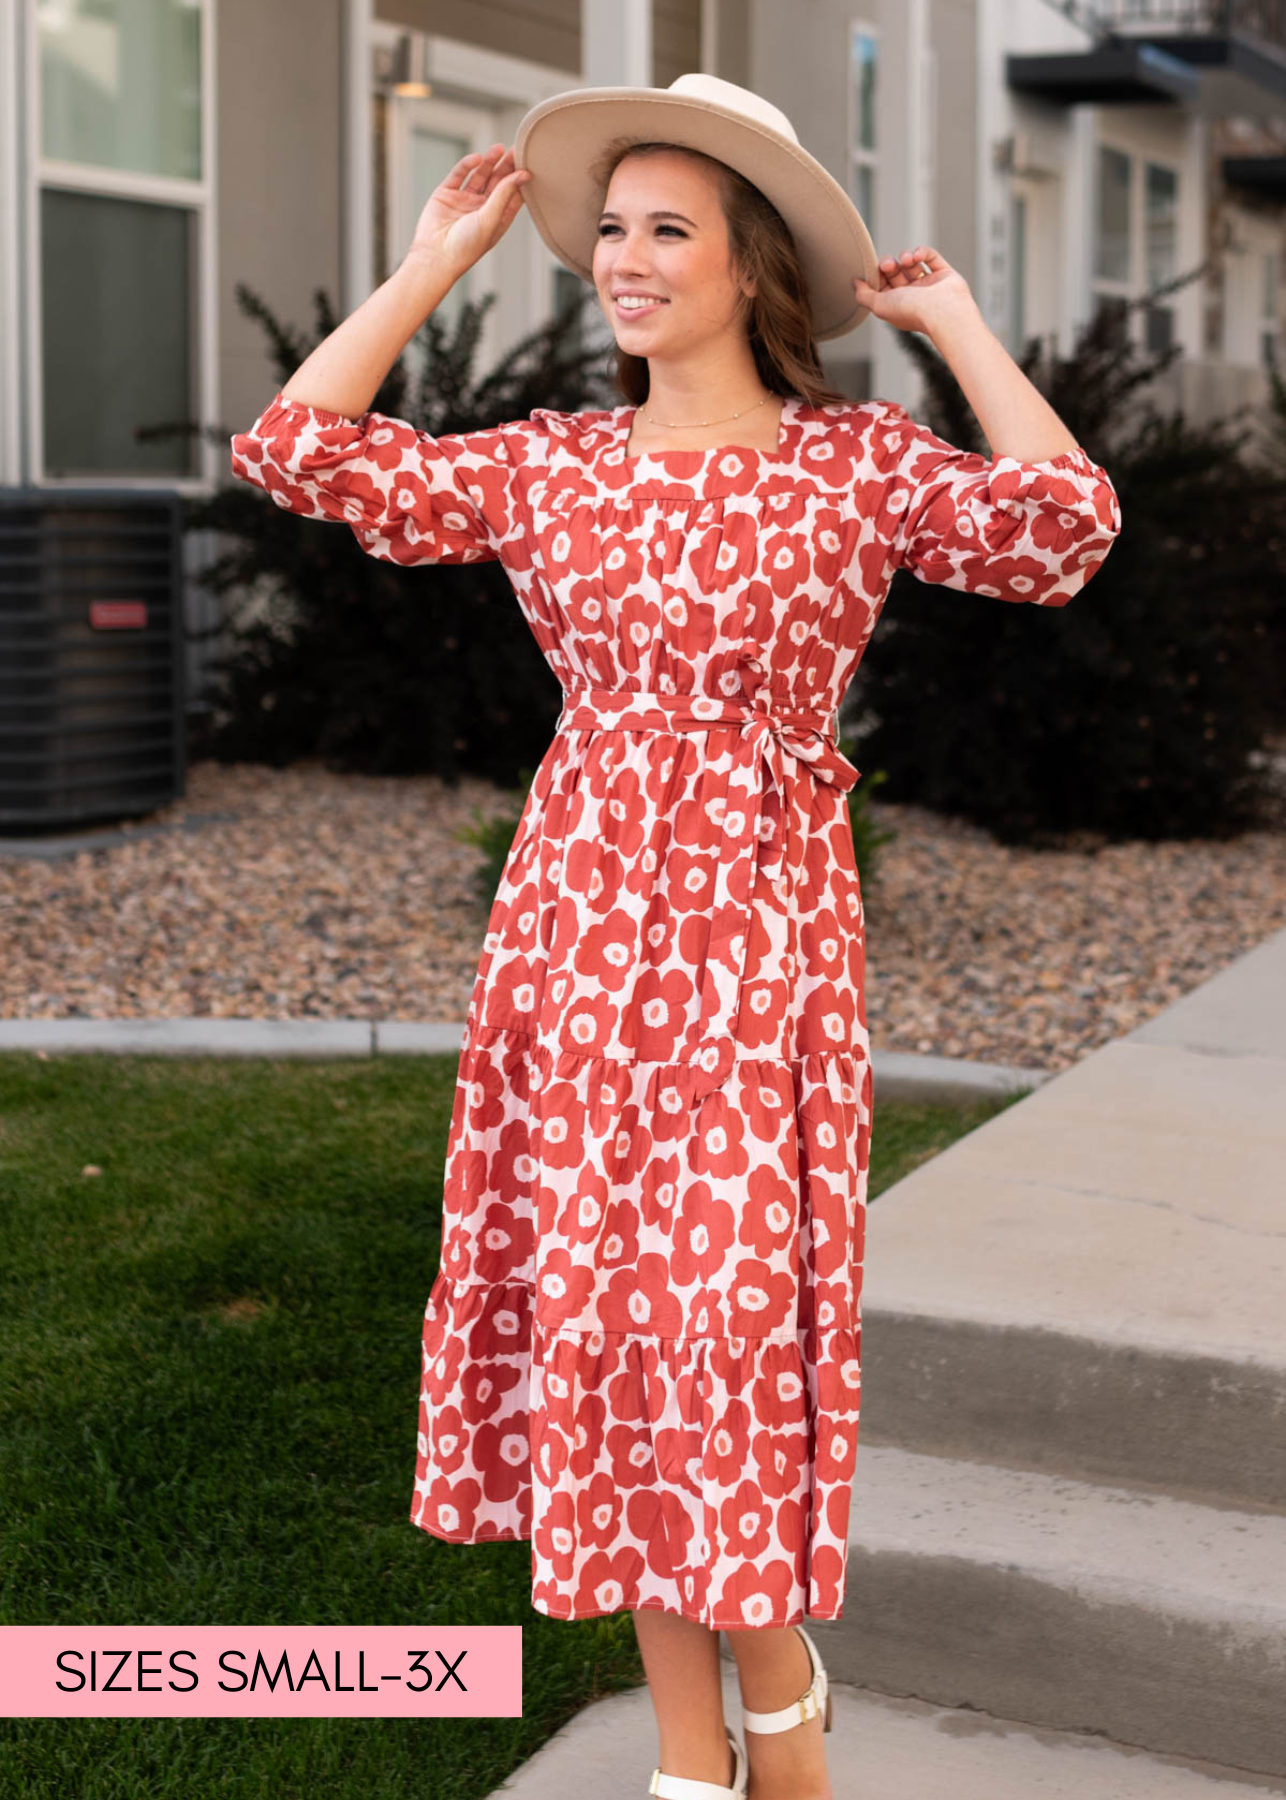 Brick floral dress that ties at the waist and has 3/4 sleeves